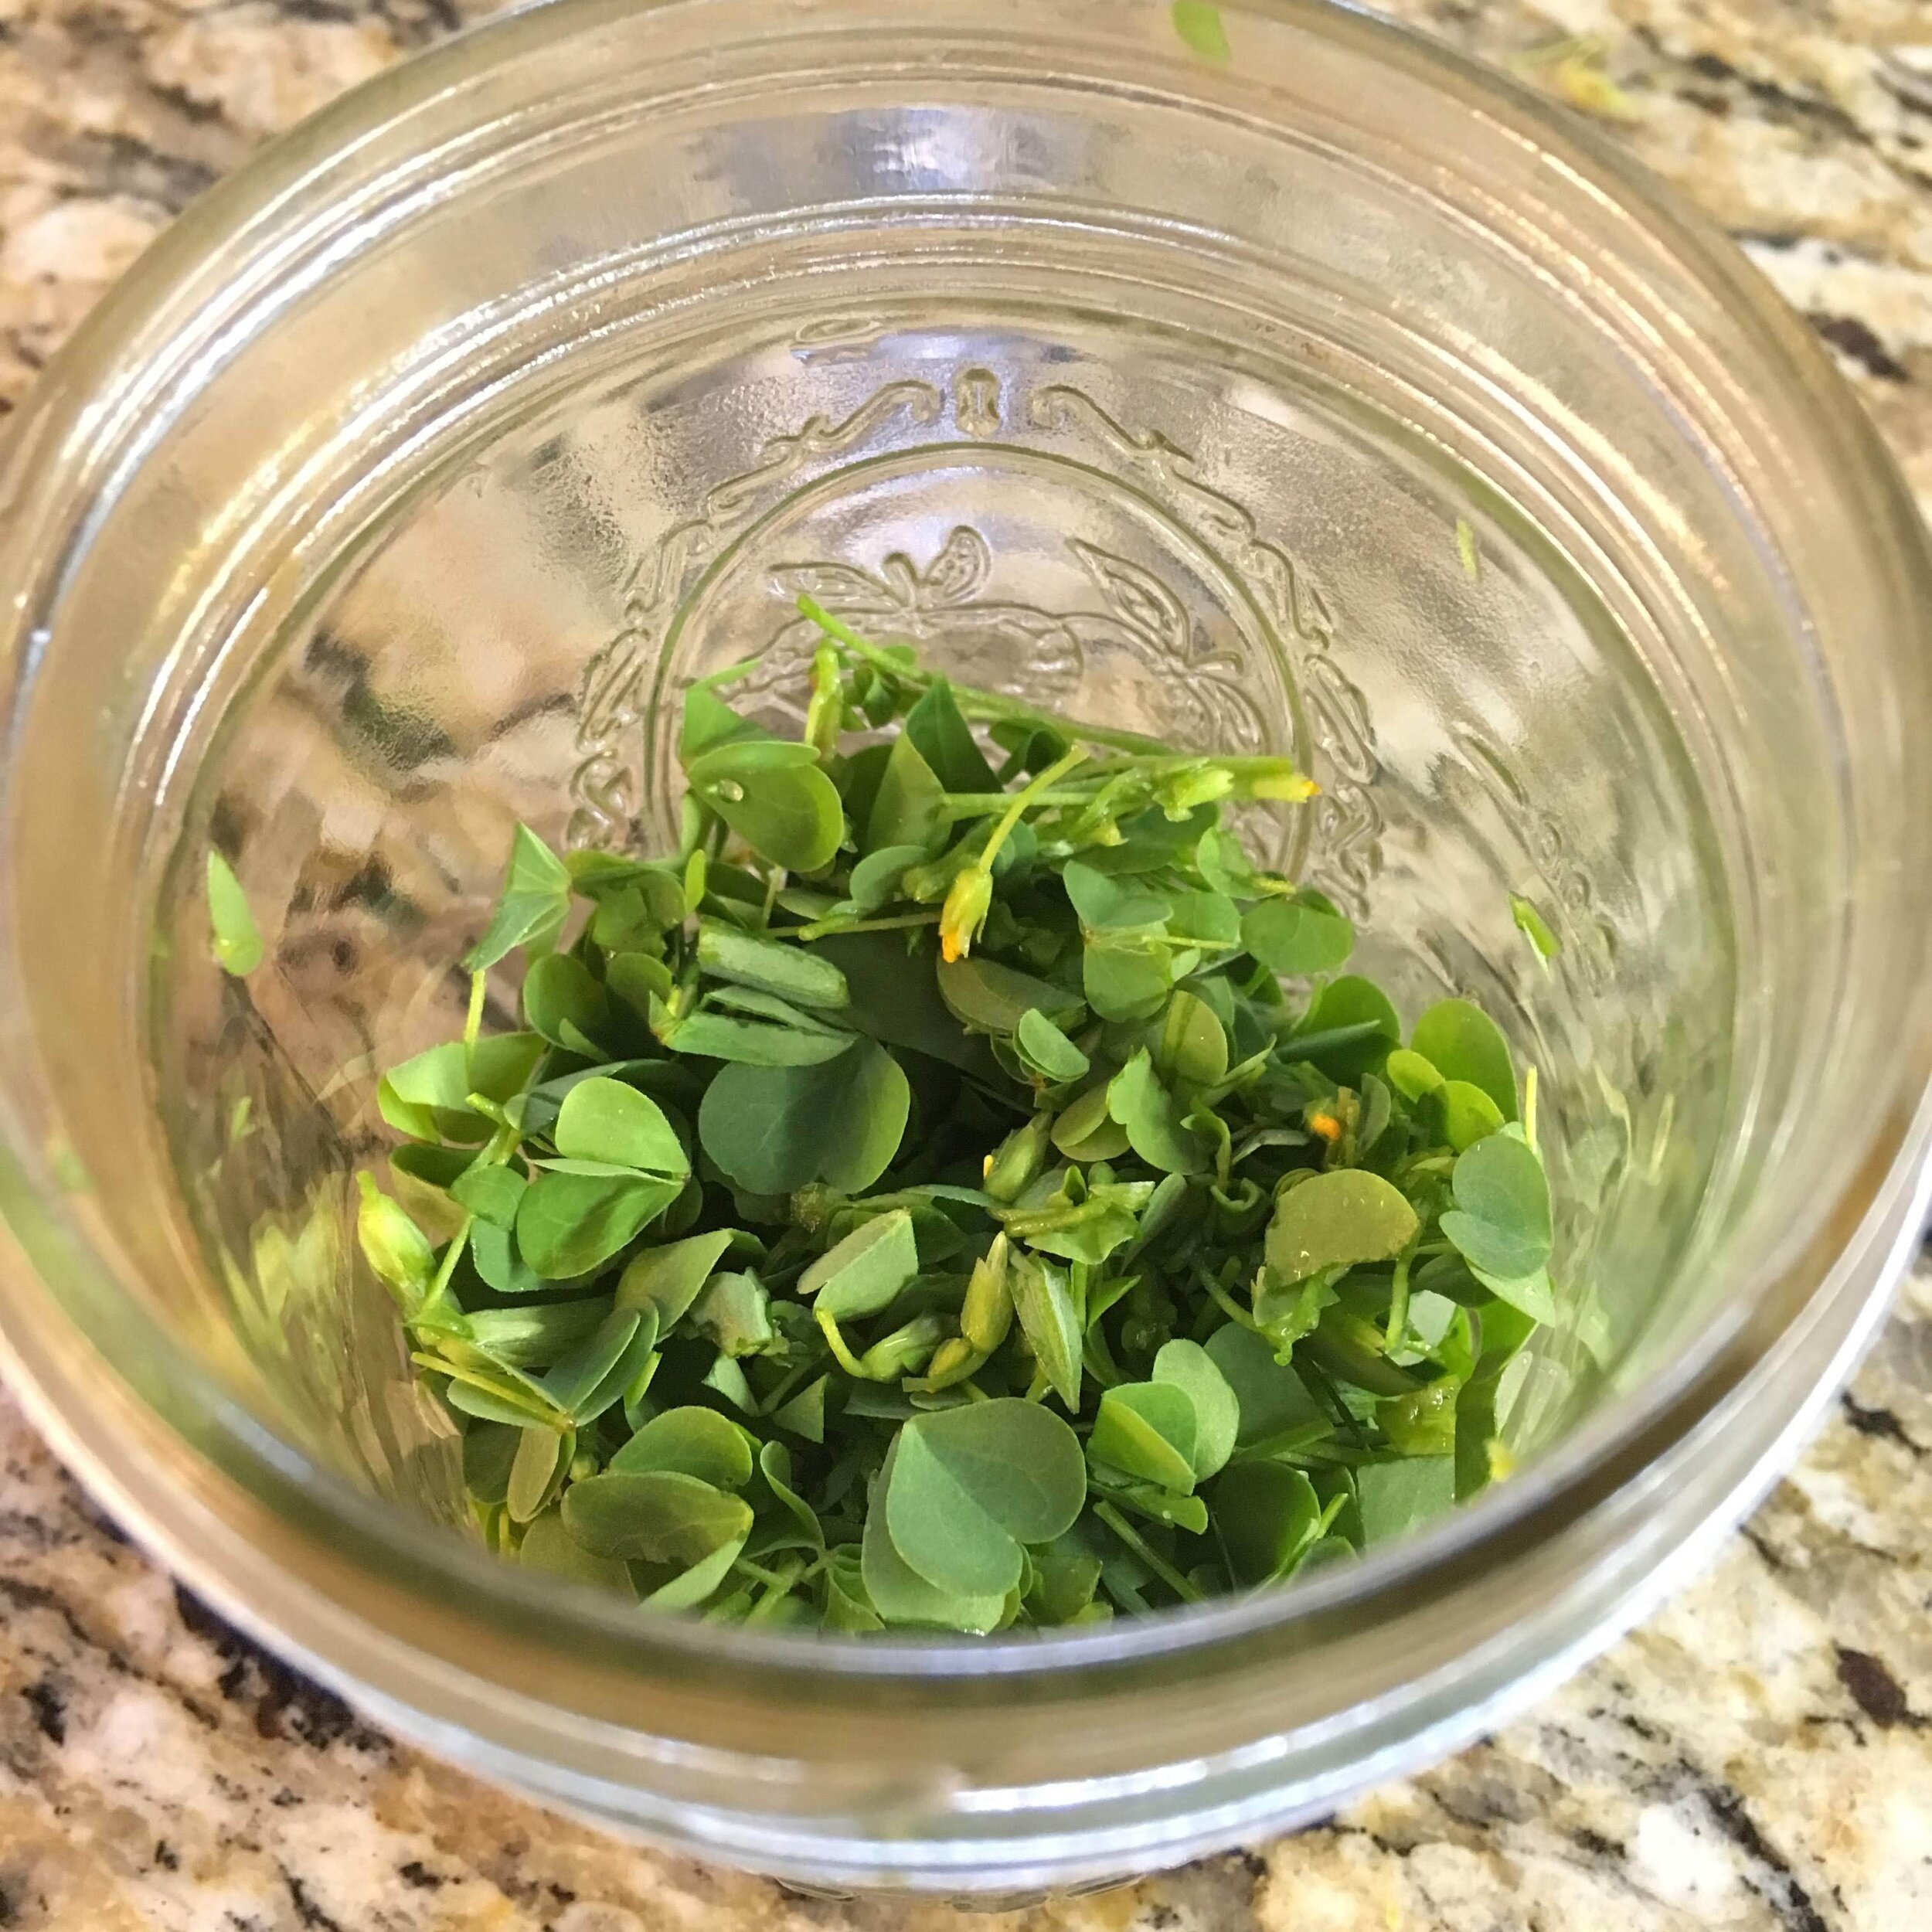 Packing yellow wood sorrel into a jar for a cold water infusion.